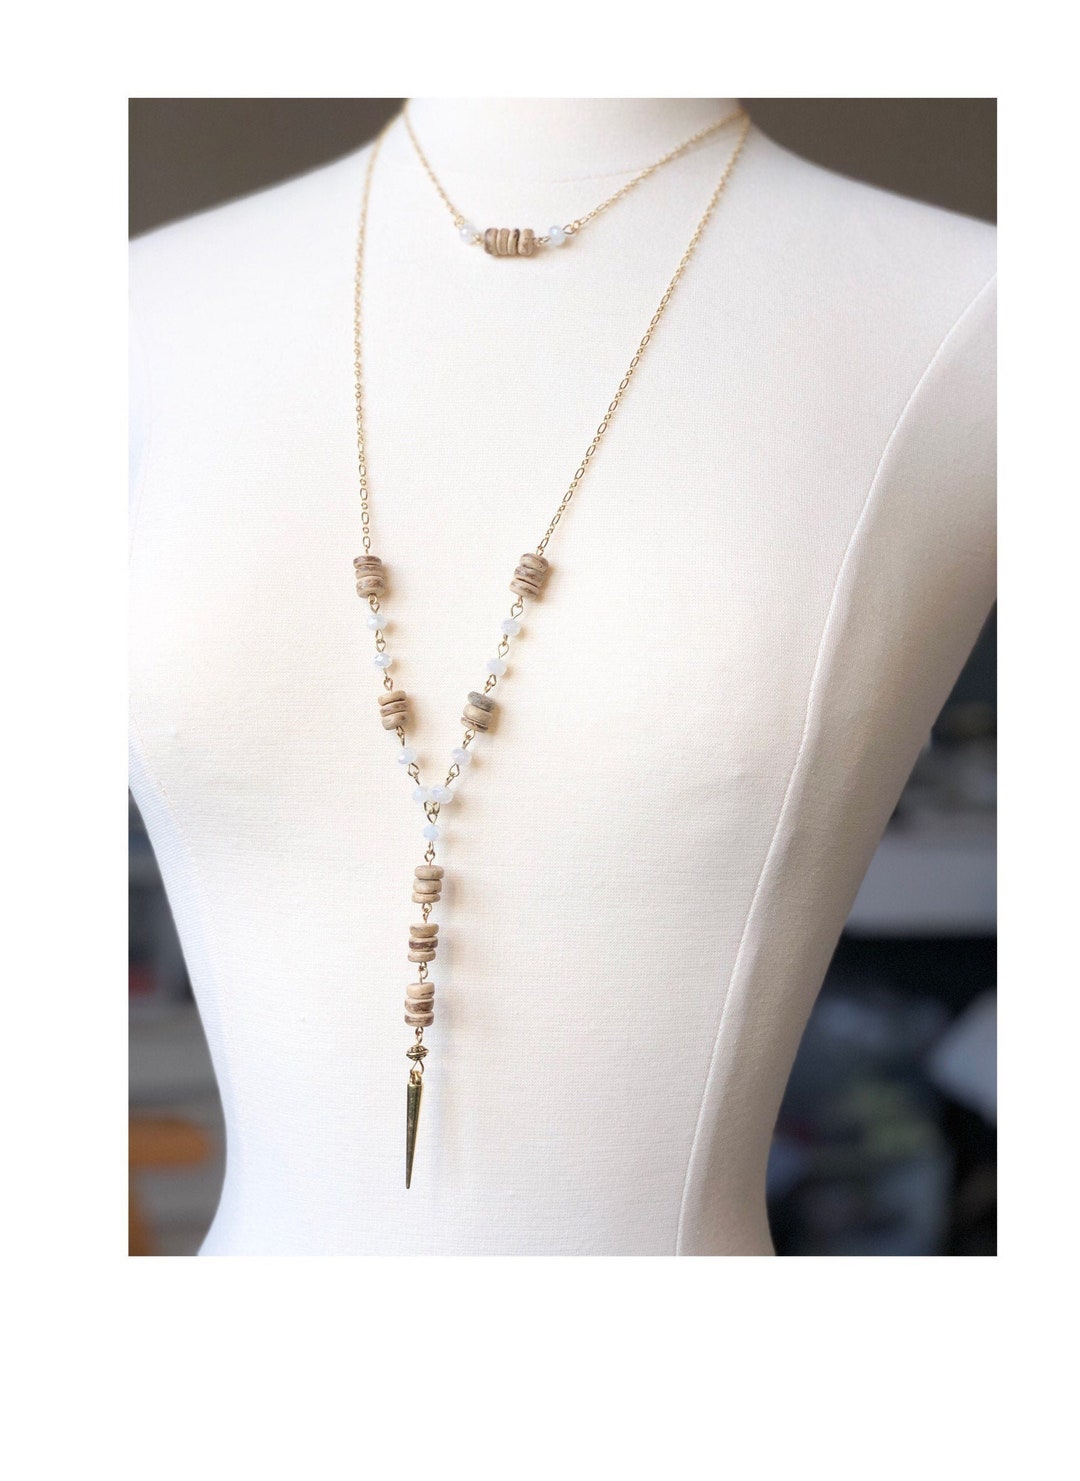 Blossom daisy chain lariat style necklace, polished